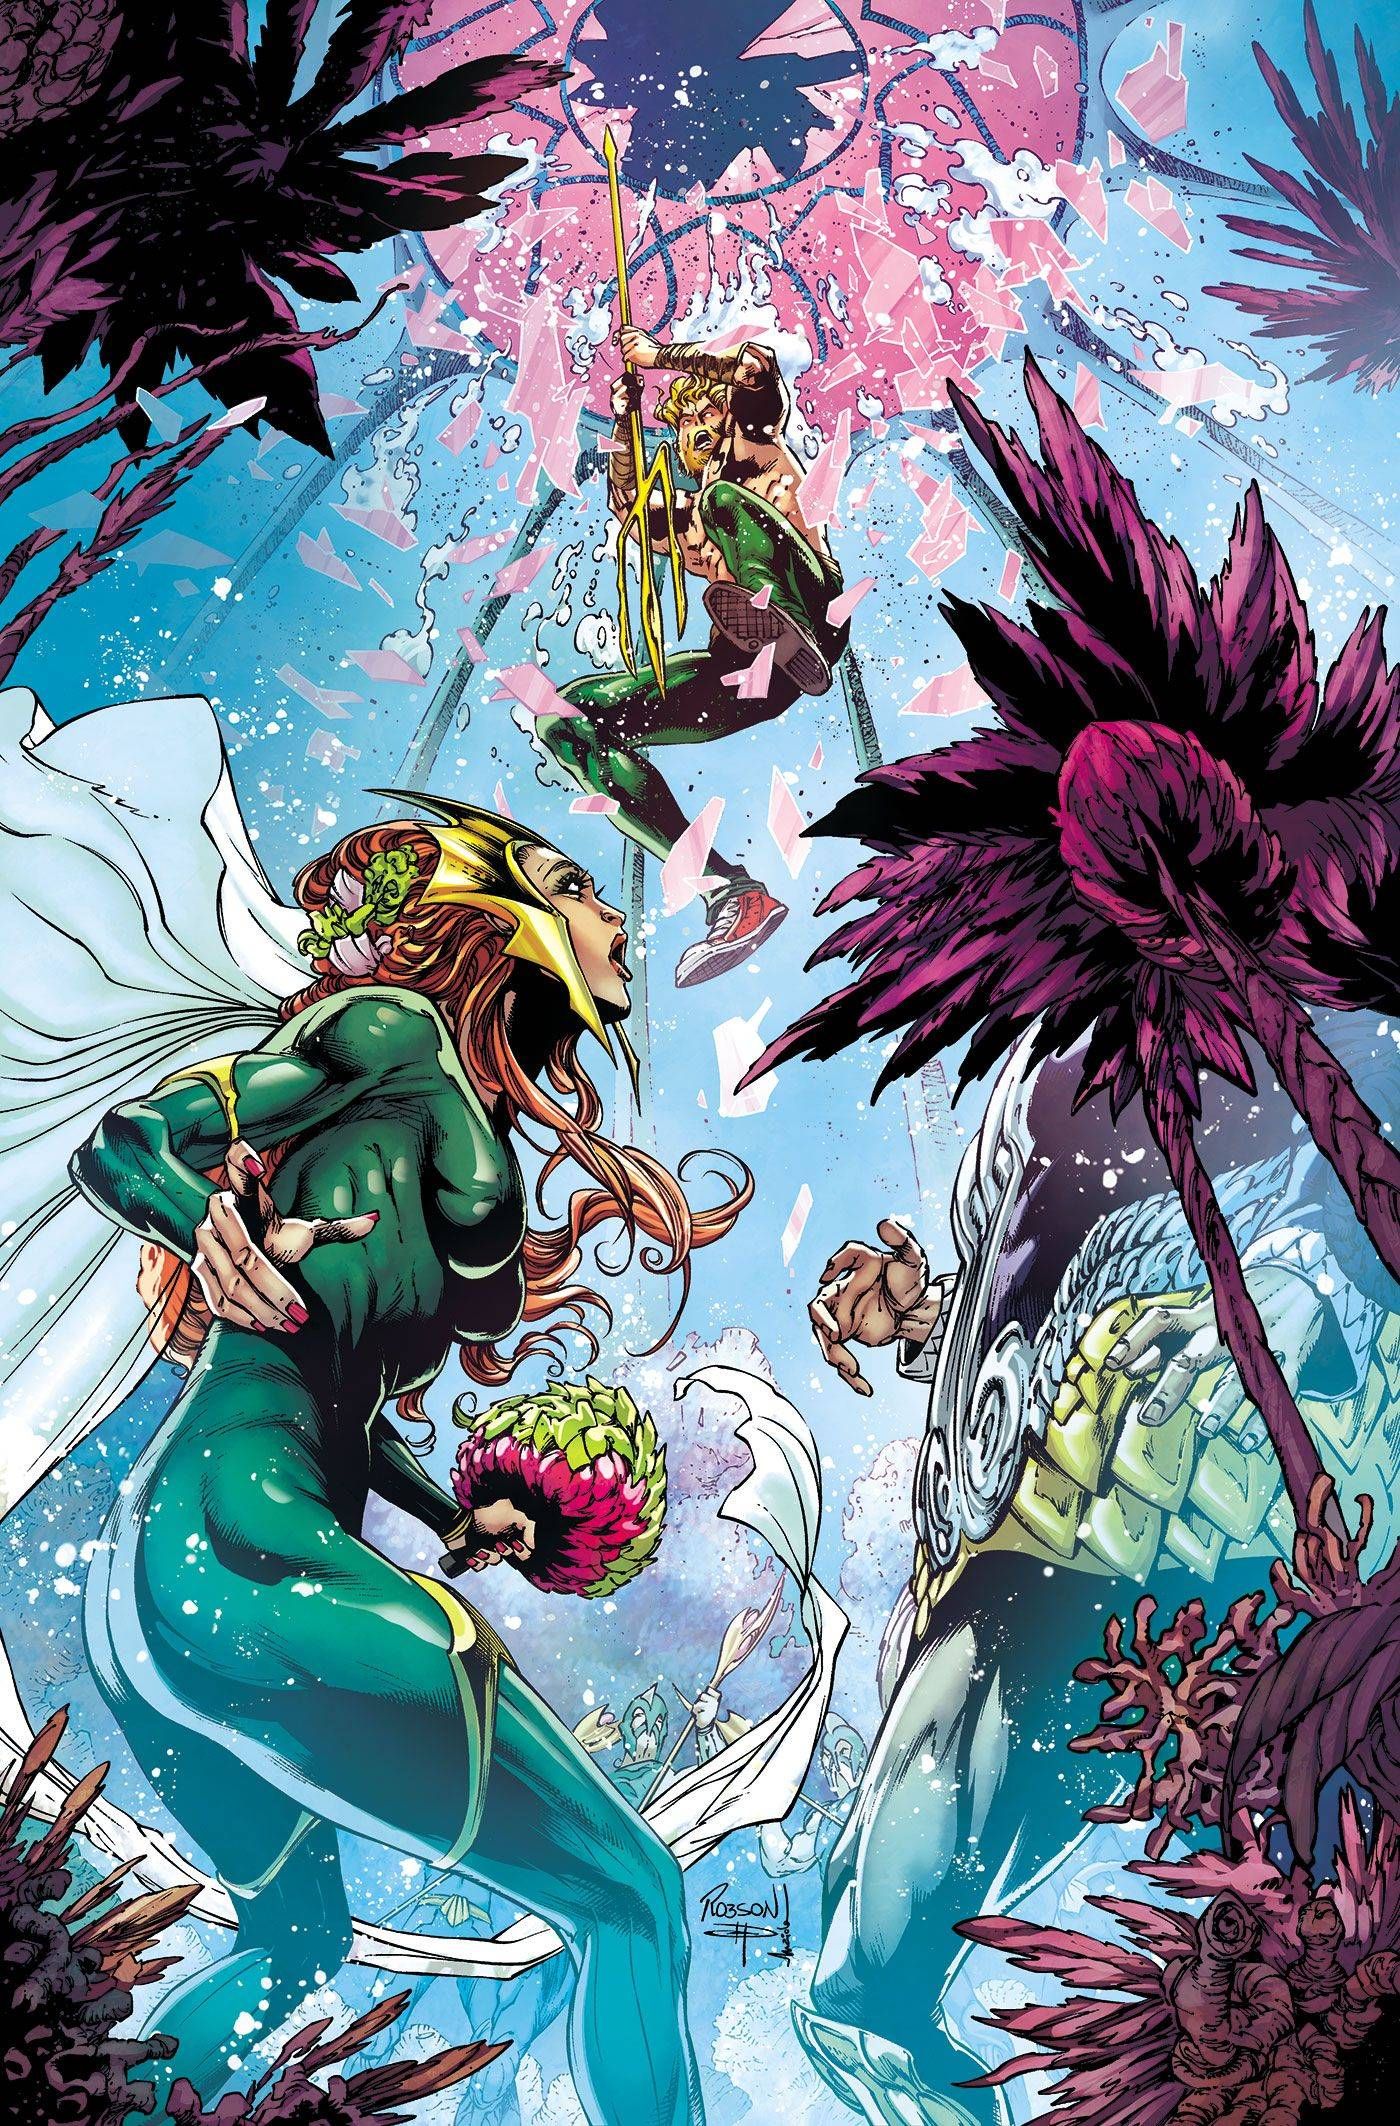 Aquaman’s Queen Mera is Getting Married, But Not To Him